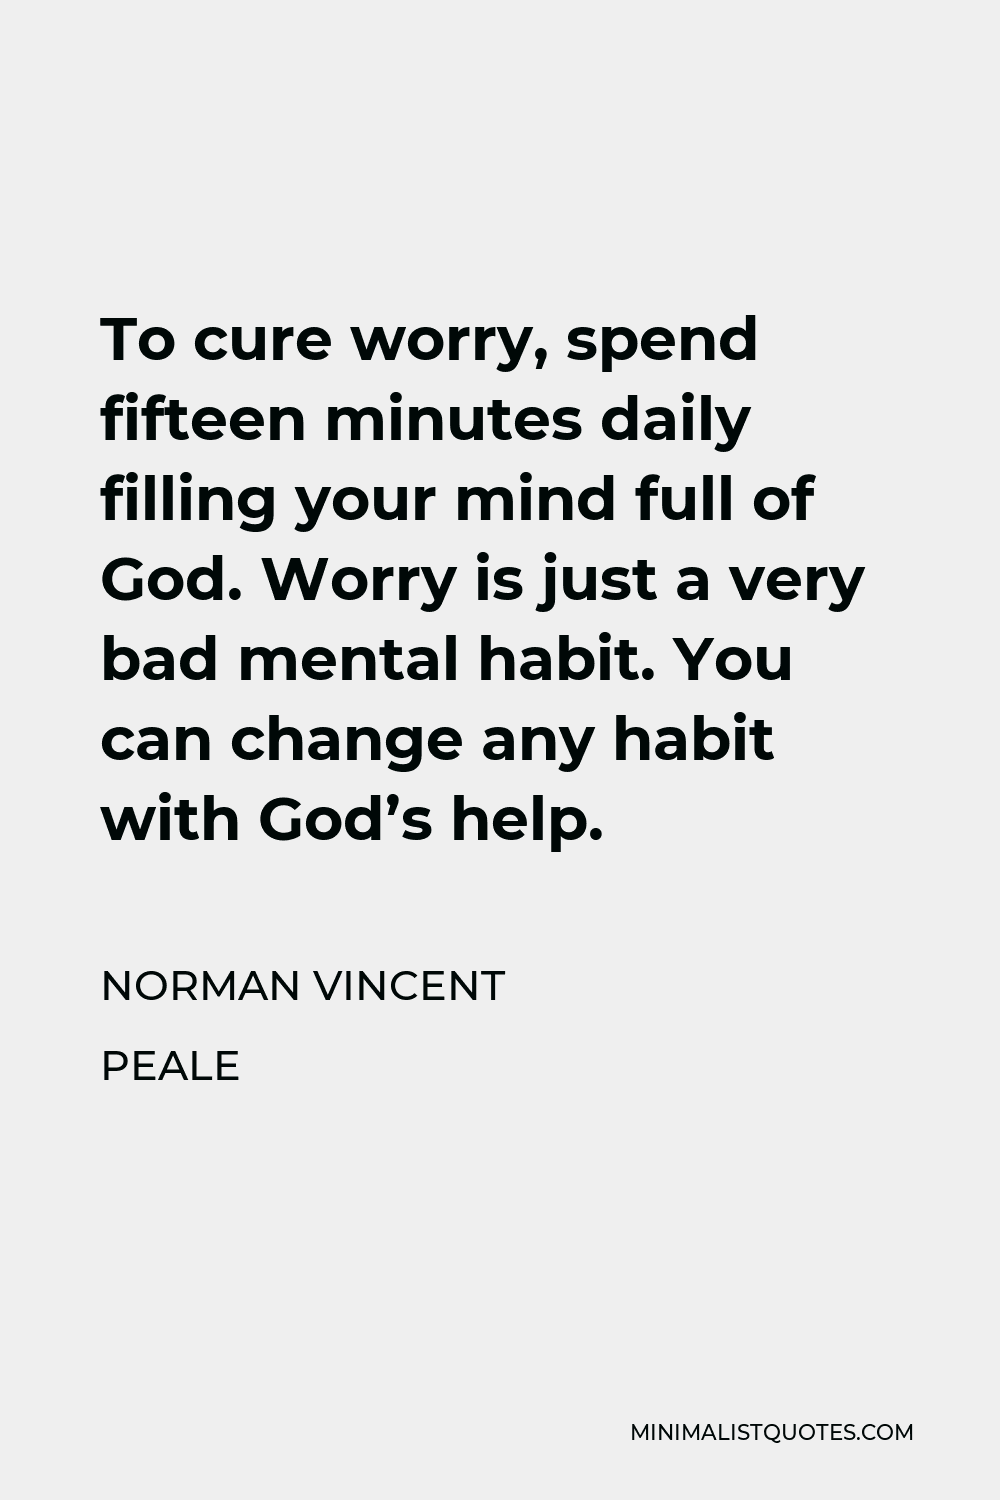 Norman Vincent Peale Quote - To cure worry, spend fifteen minutes daily filling your mind full of God. Worry is just a very bad mental habit. You can change any habit with God’s help.